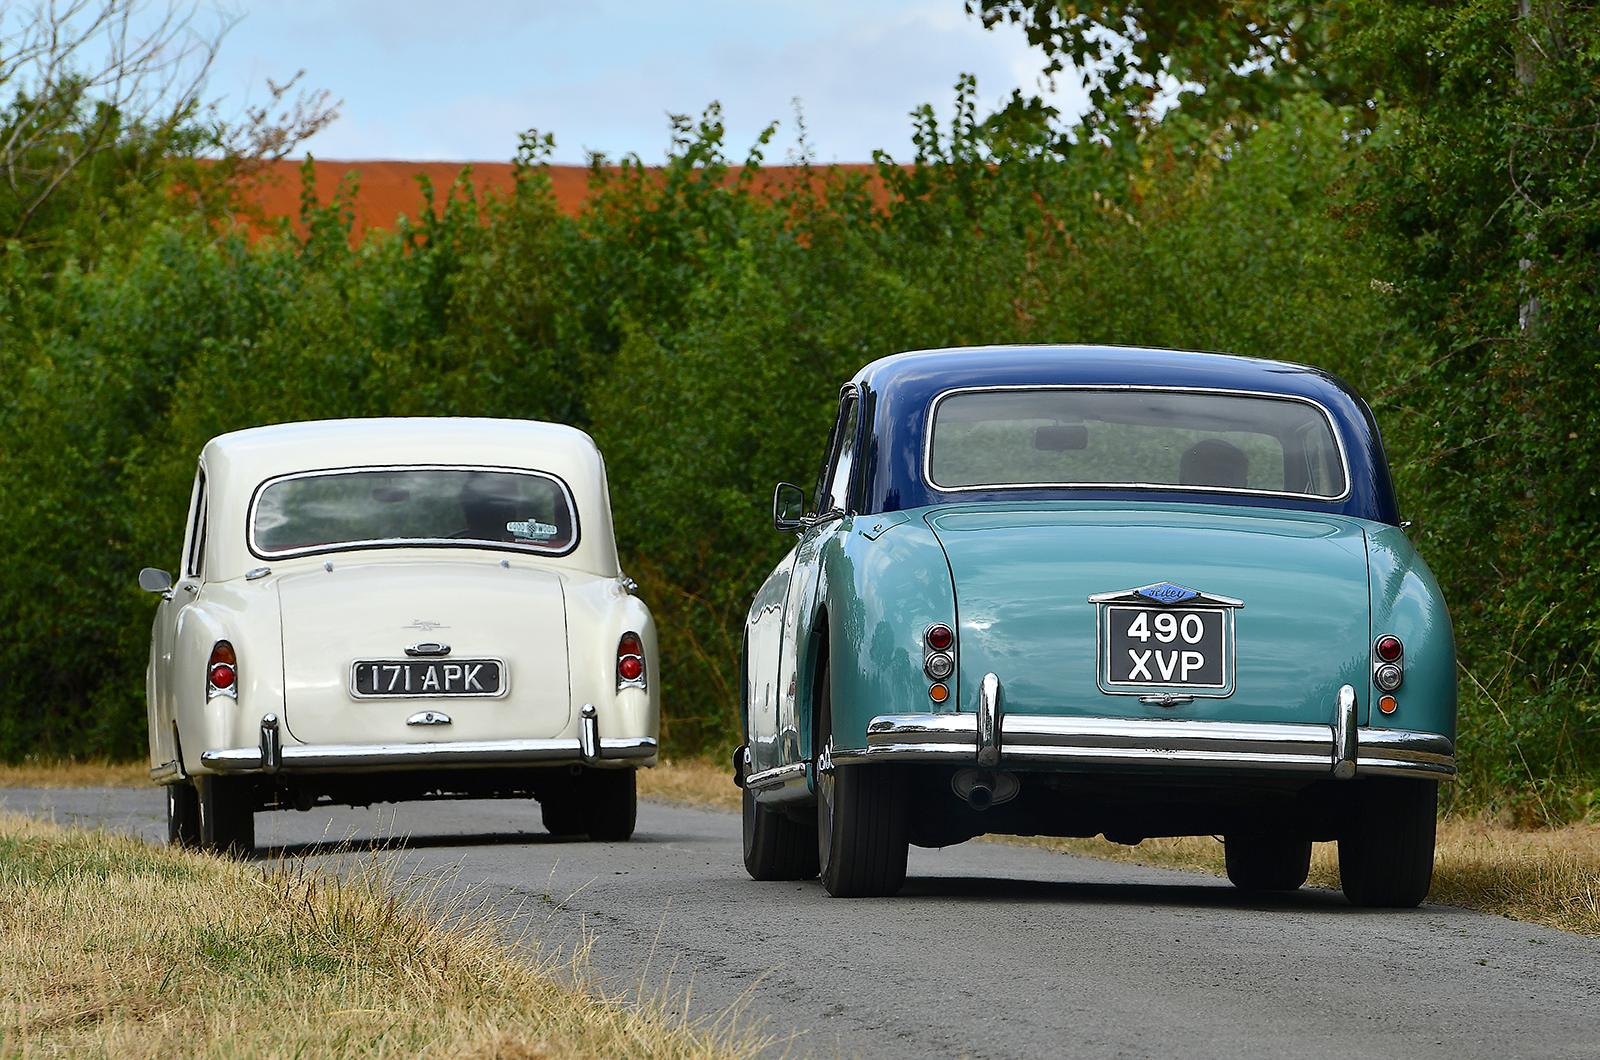 Classic & Sports Car – Riley Pathfinder vs Armstrong Siddeley 236: end of the line